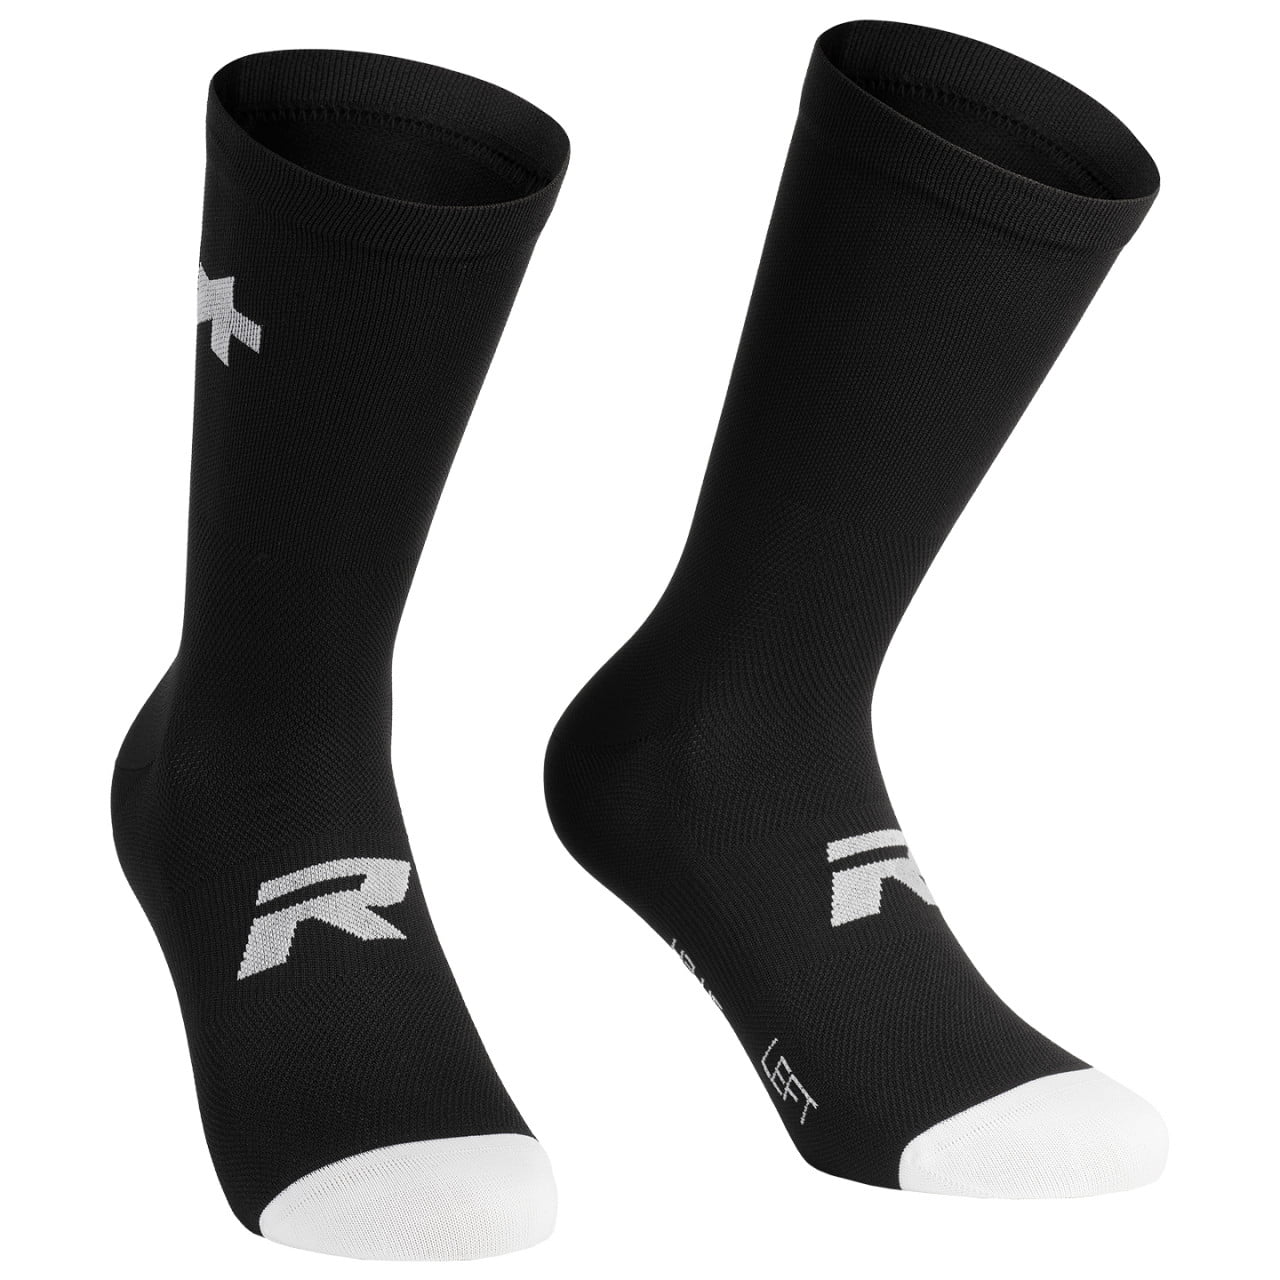 R S9 Cycling Socks (pack of 2)